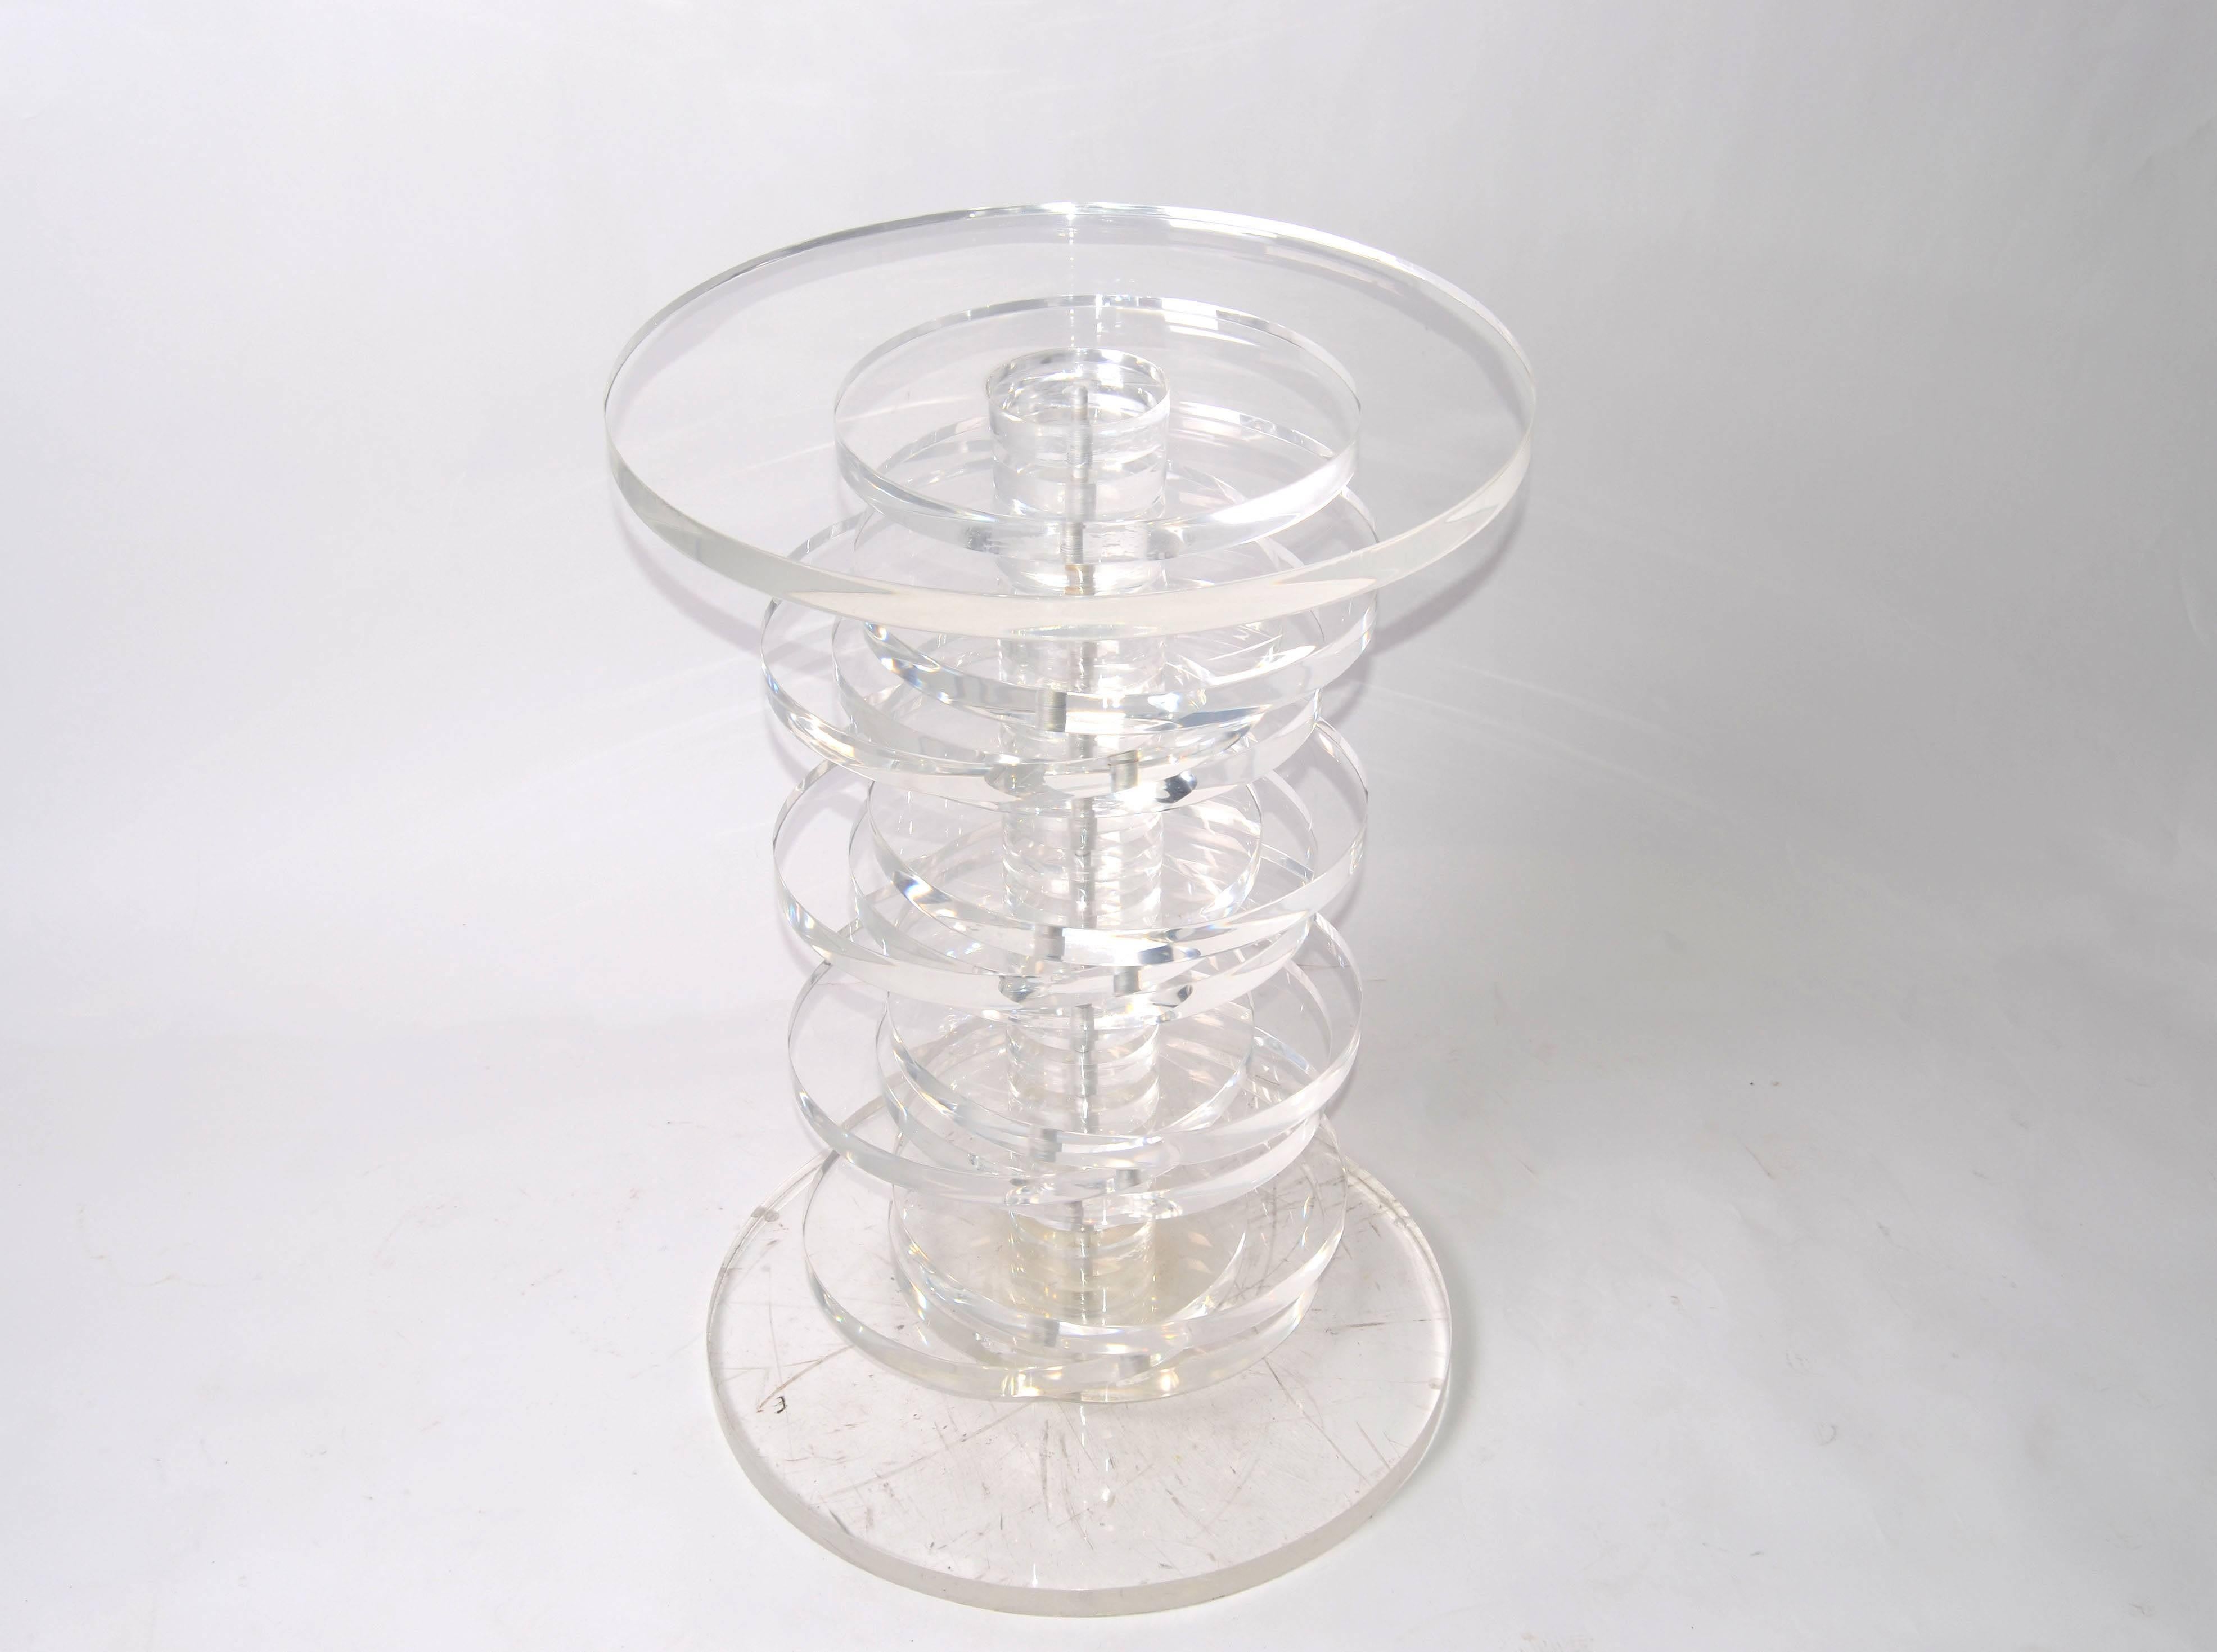 Round Mid-Century Modern stacked Lucite coffee table.
Great visual effect with the solid Lucite discs.
No Glass.
